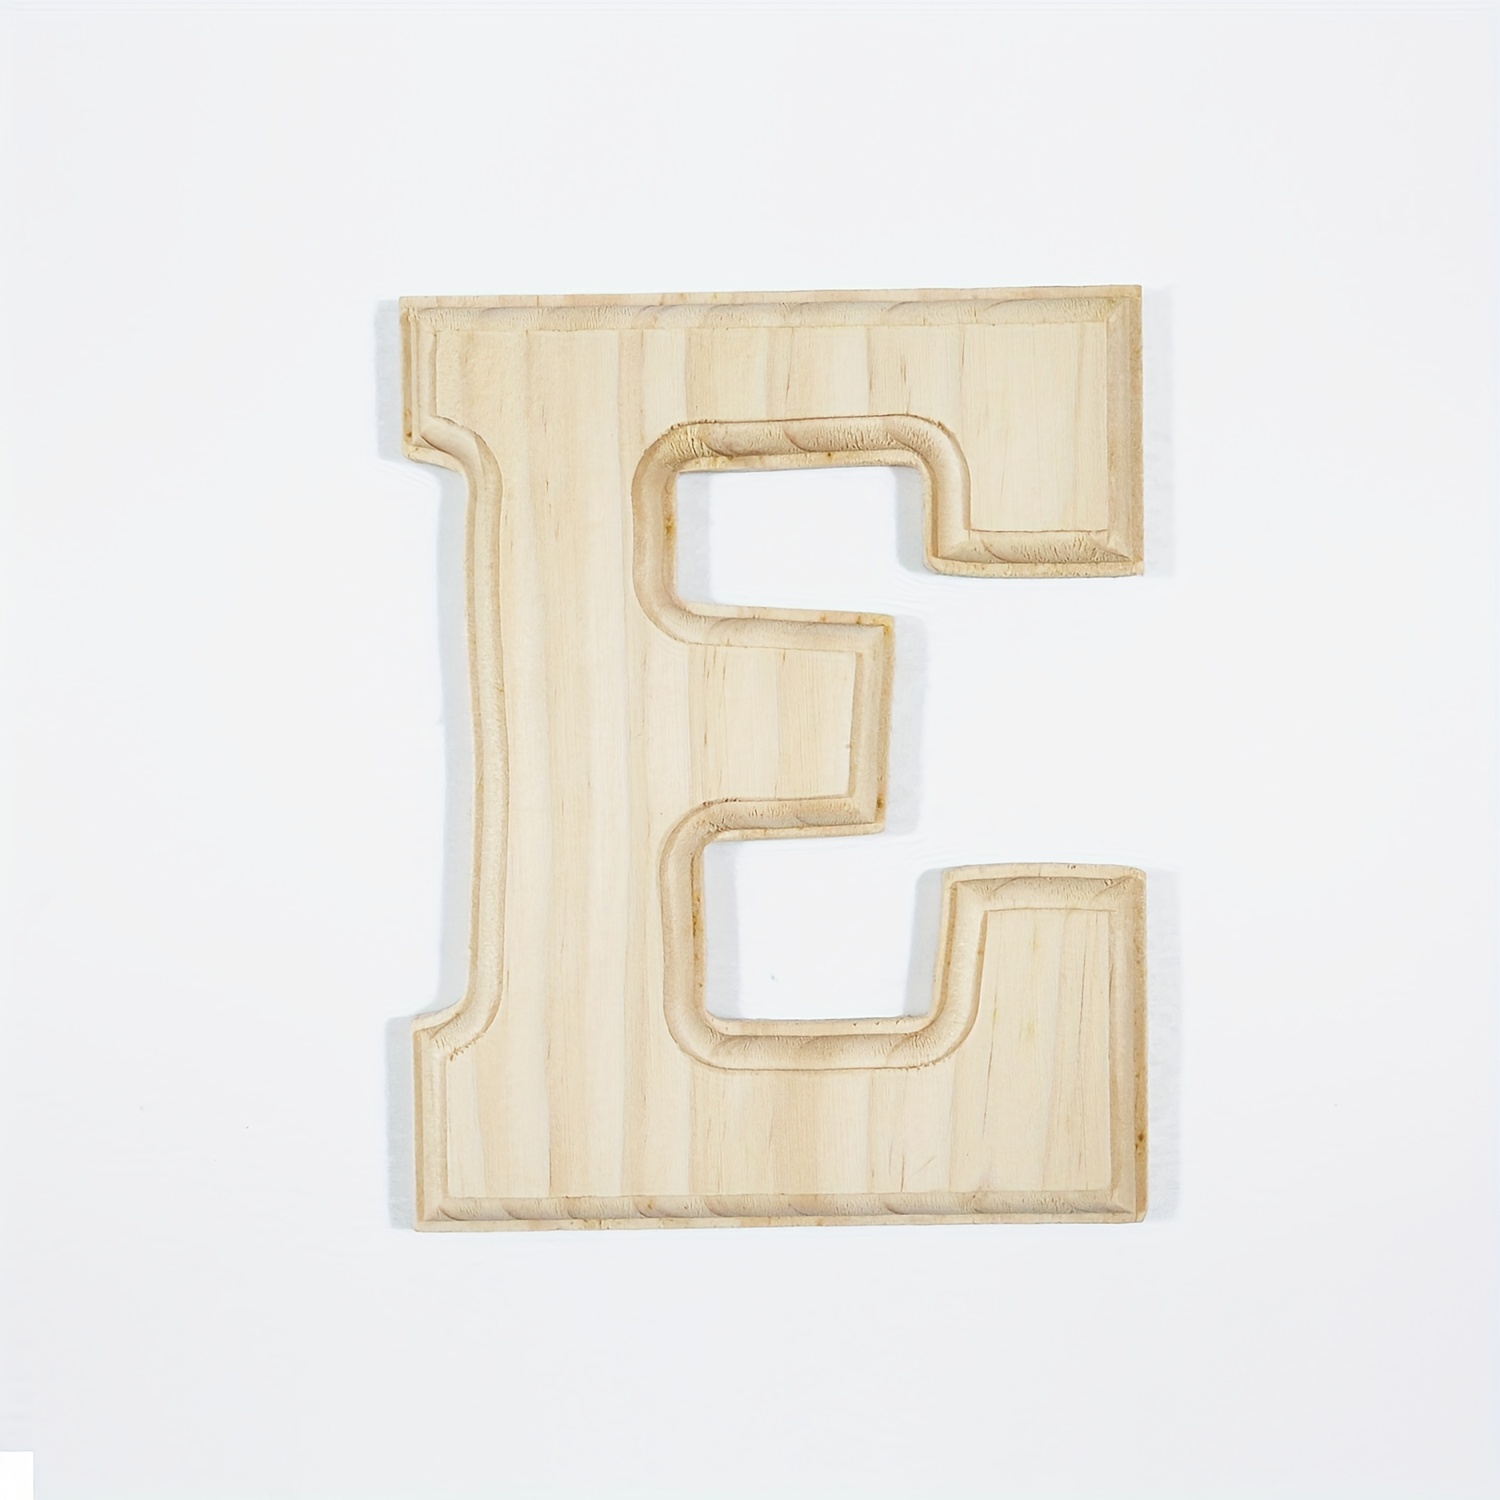 White Wood Letters 6 Inch, Wood Letters for DIY Party Projects (W)